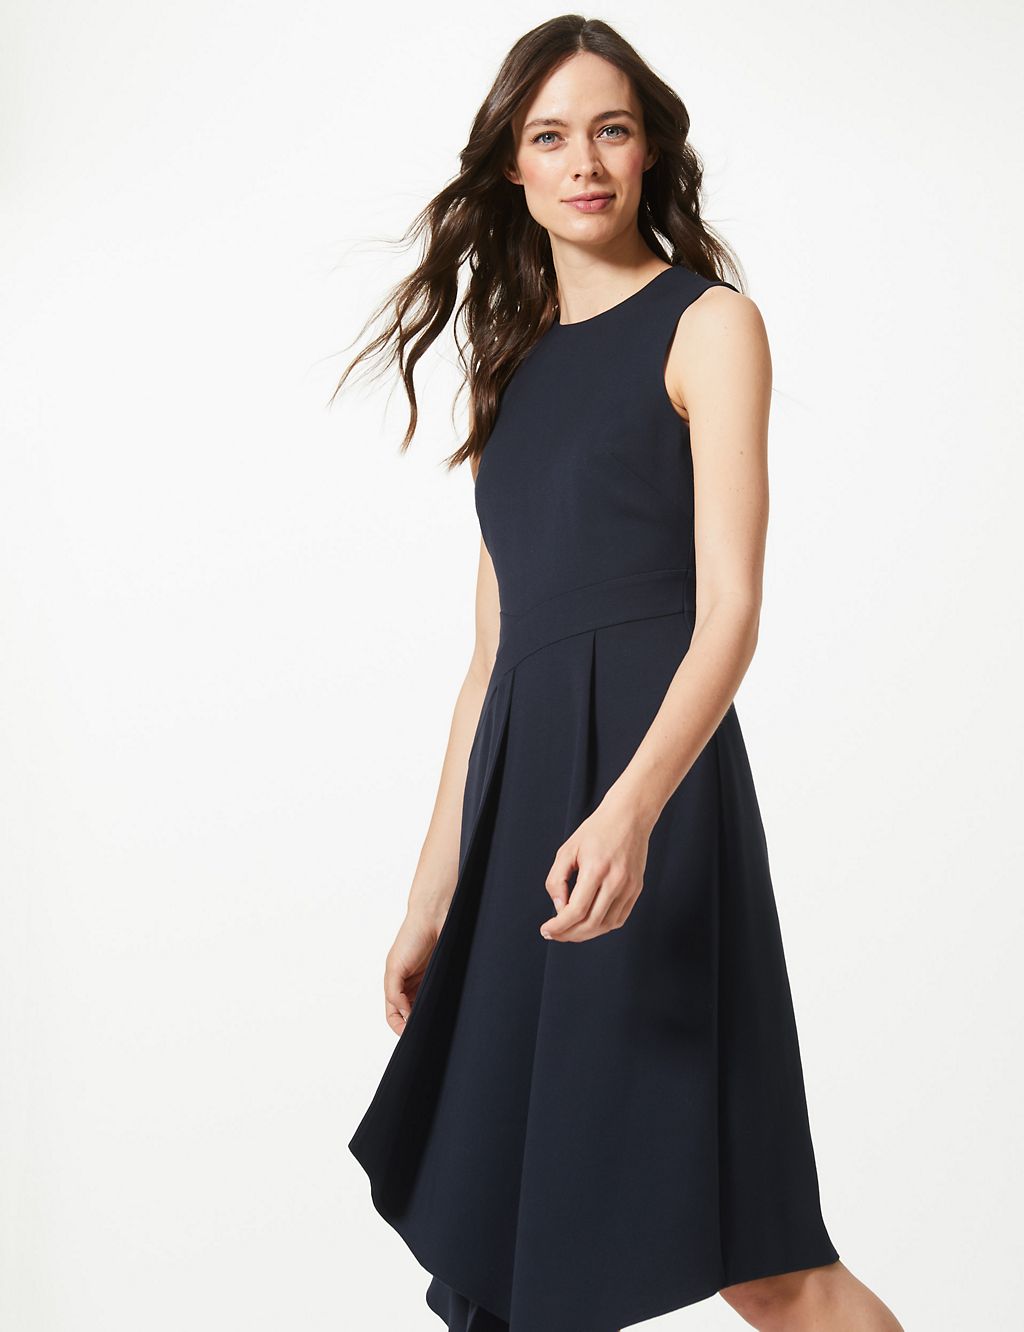 Fit & Flare Midi Dress | M&S Collection | M&S